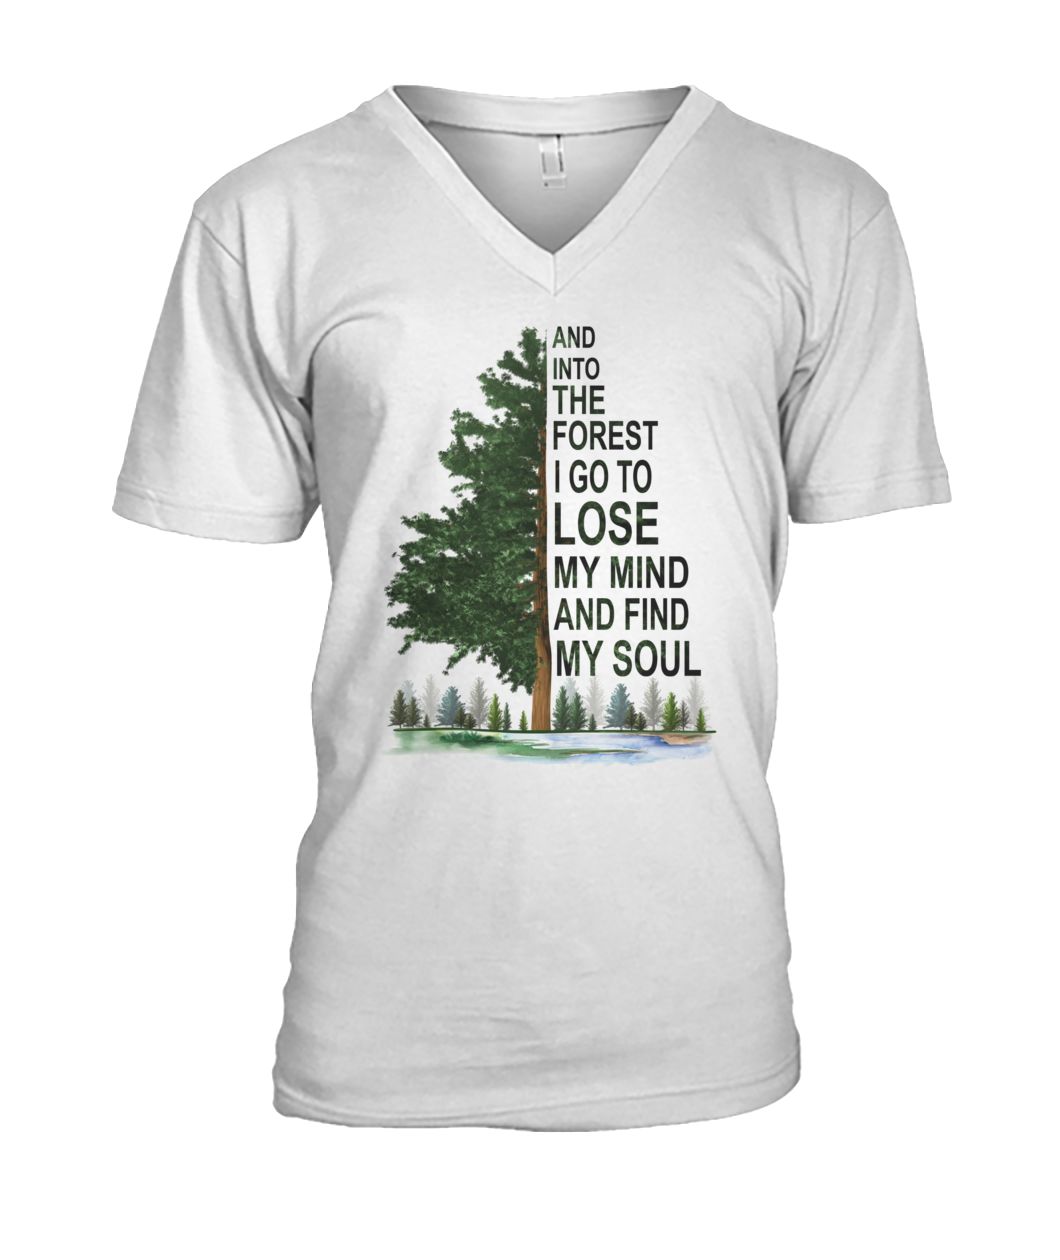 And into the forest I go to lose my mind and find my soul mens v-neck